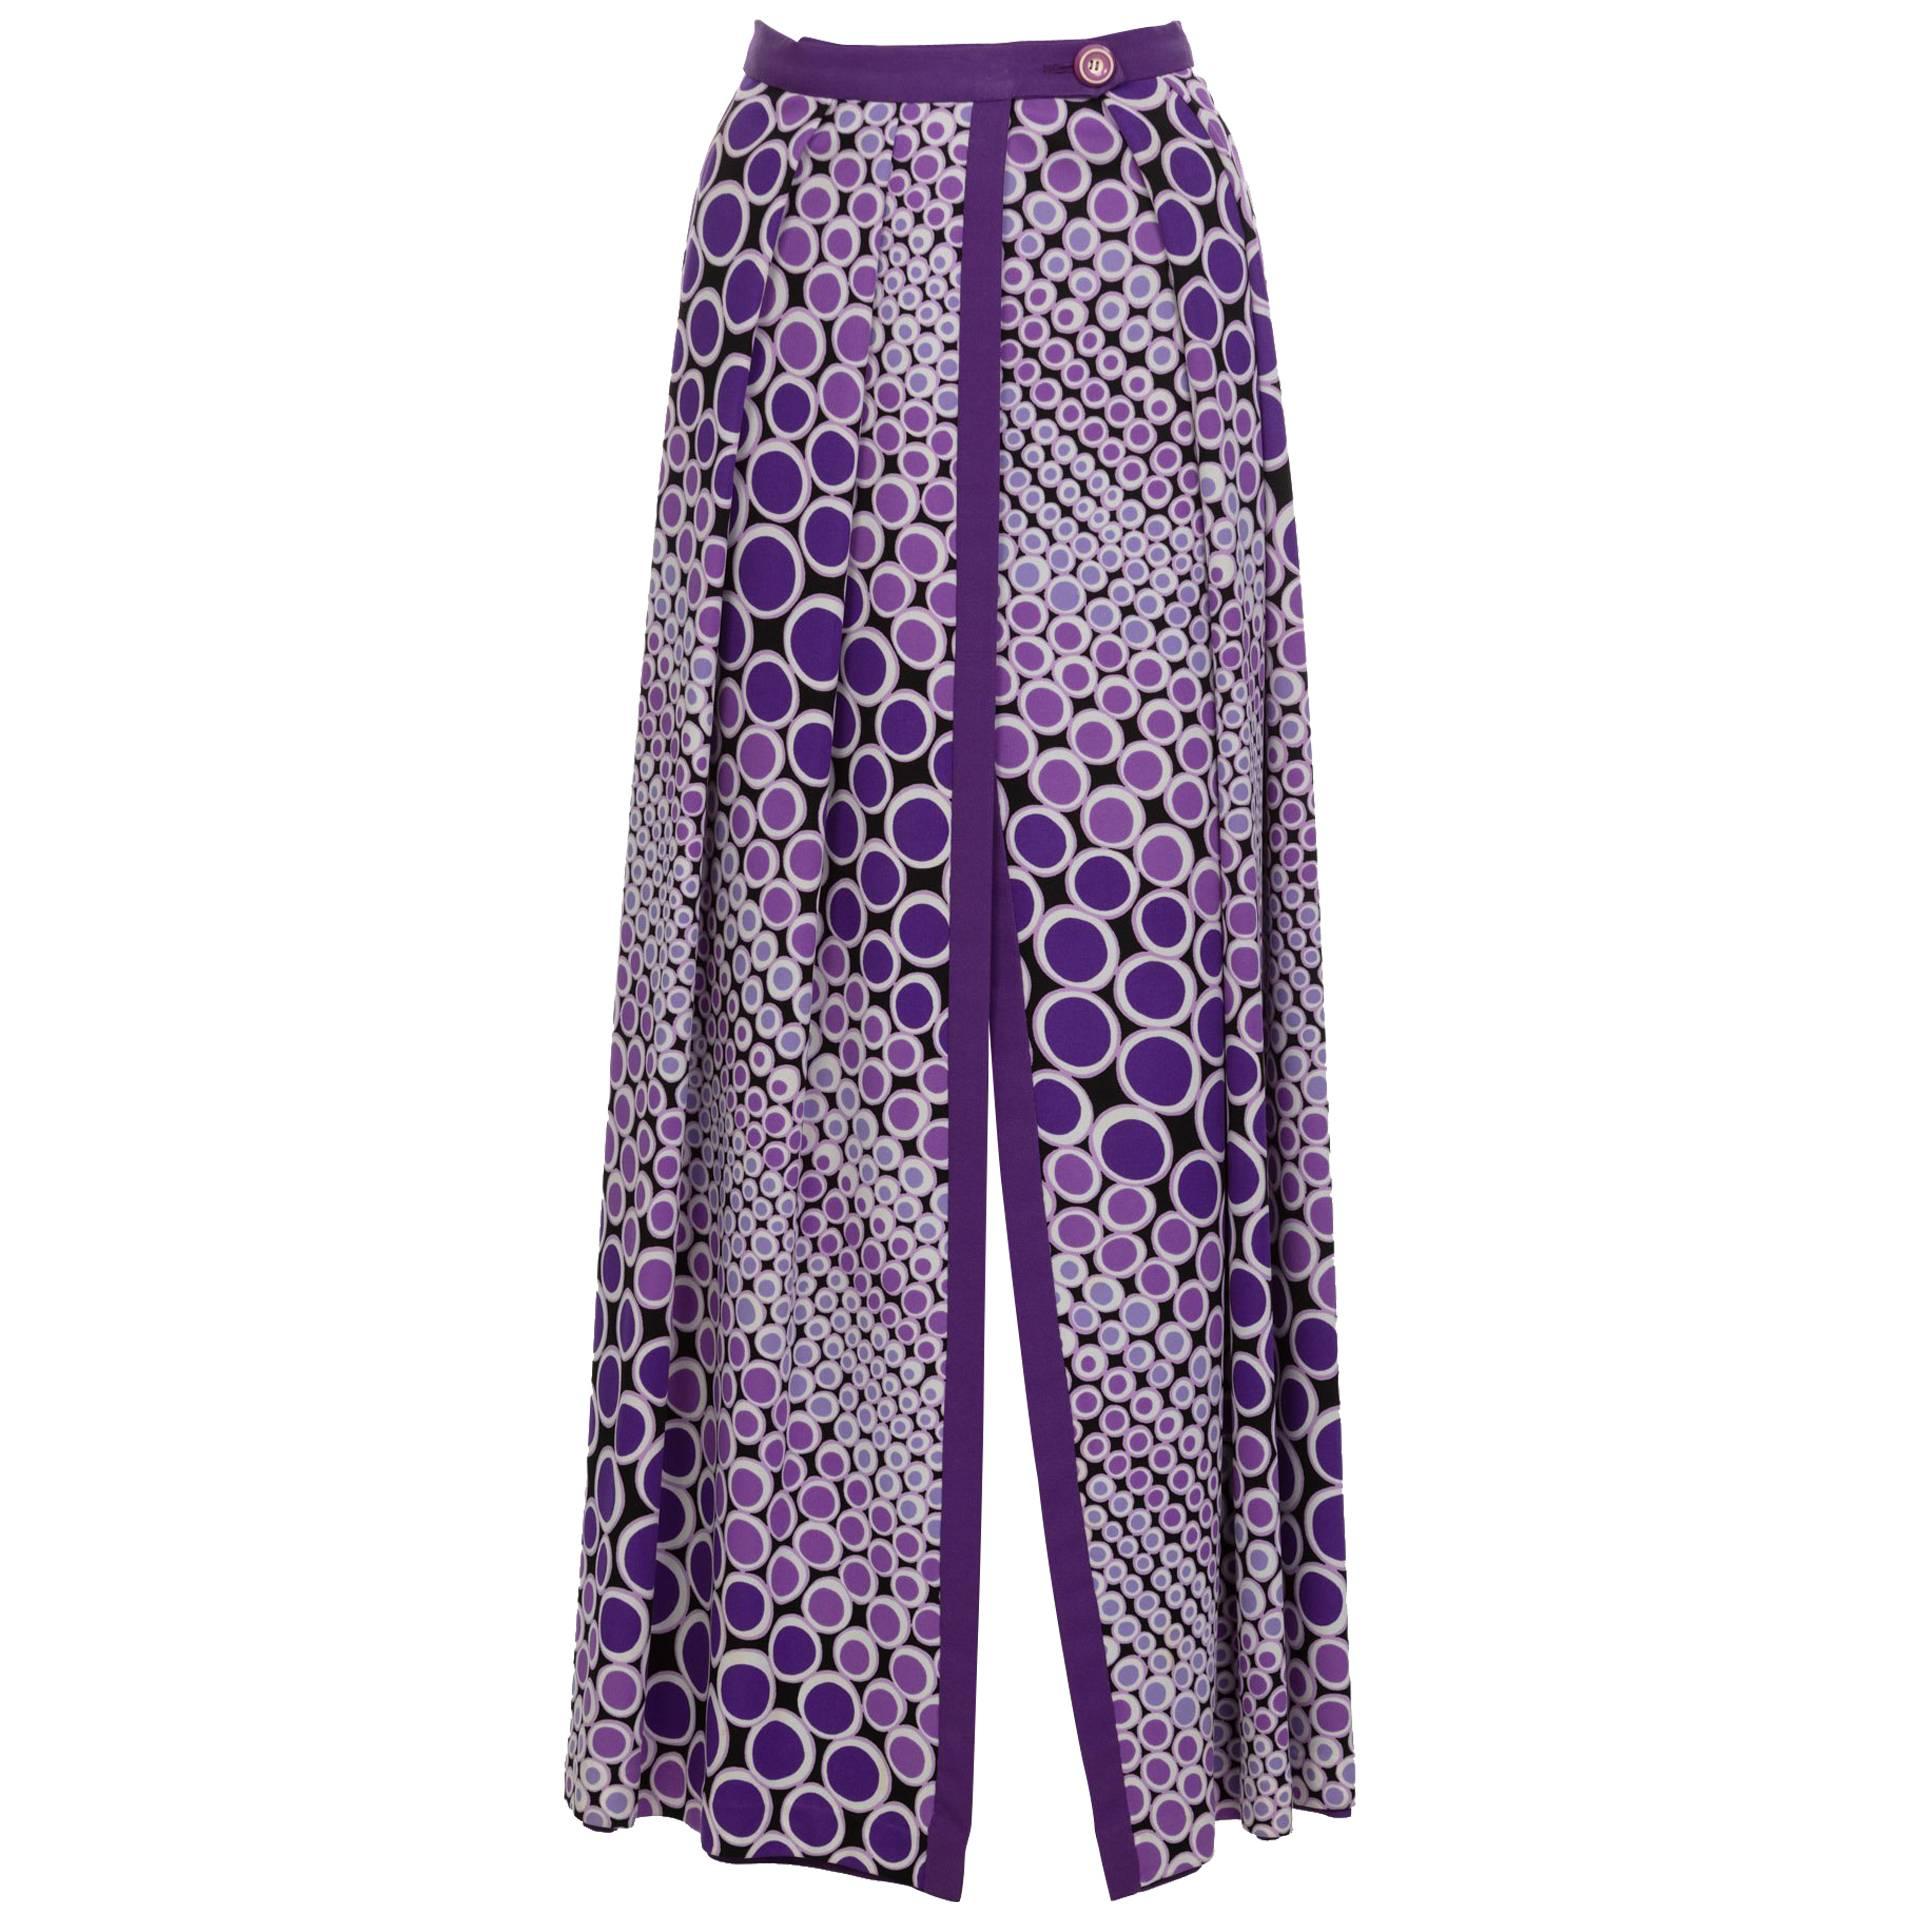 Mod Purple and White Polka Dot Maxi Wrap Skirt, 1970s  For Sale